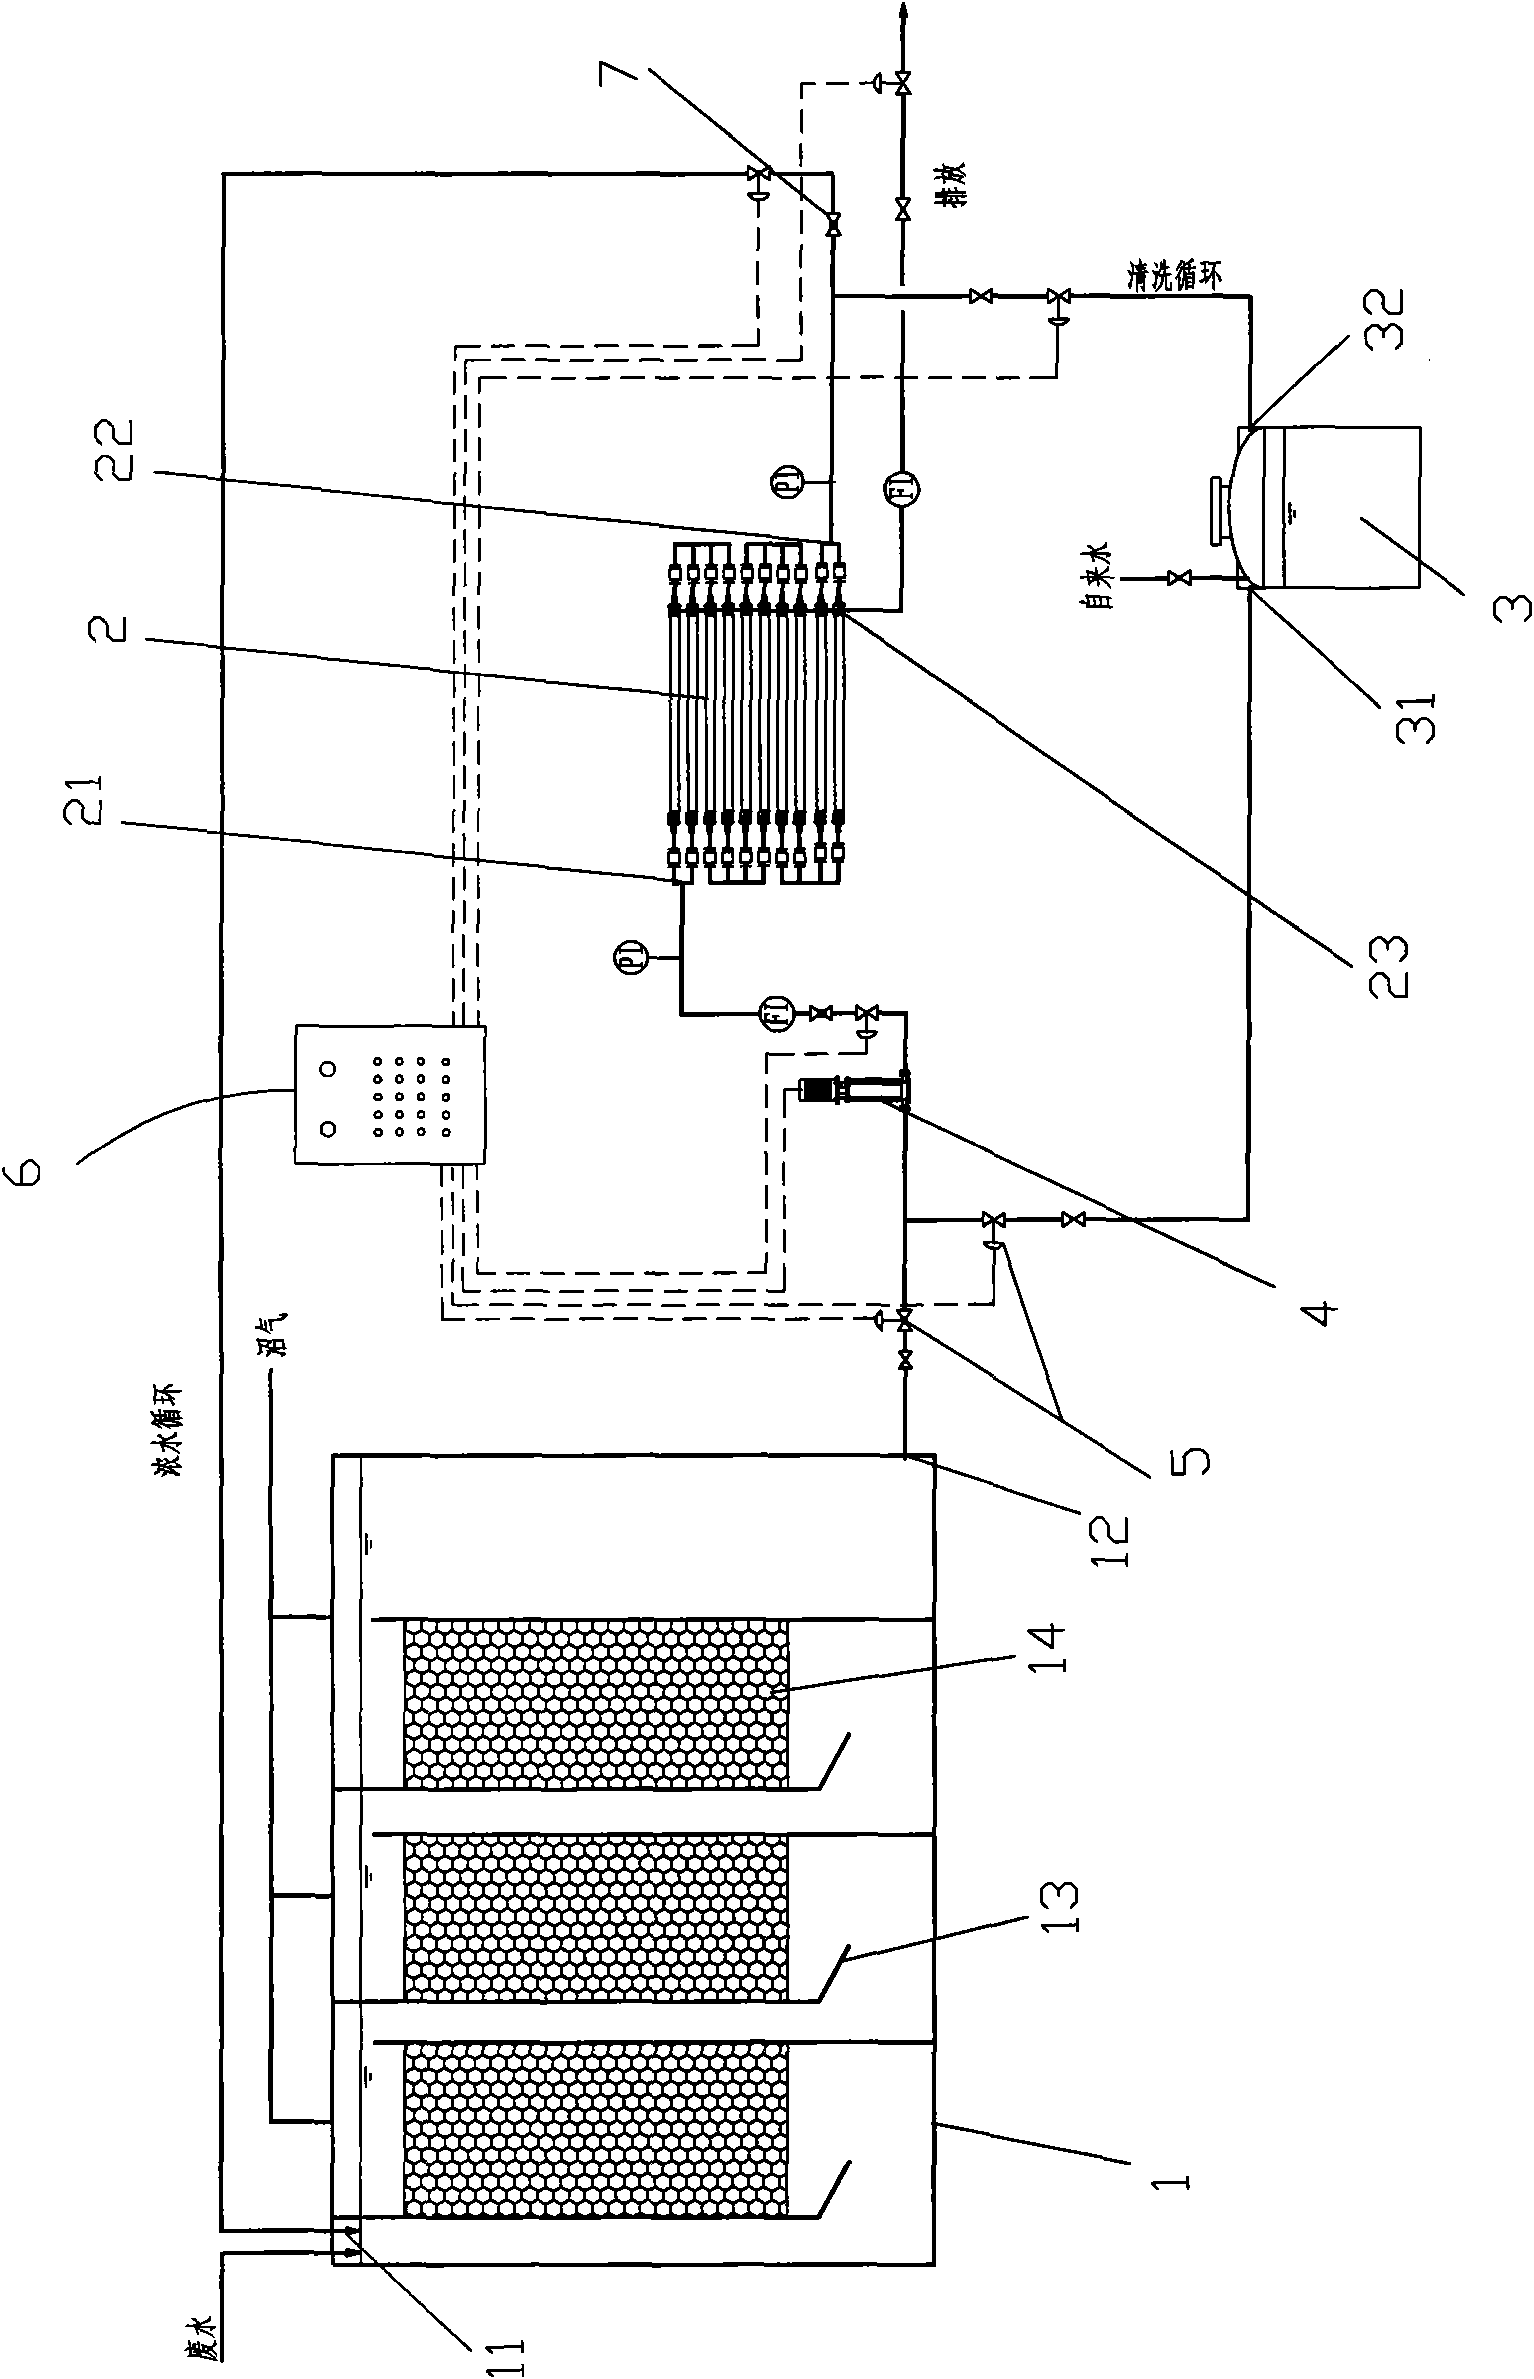 Novel membrane coupled anaerobic bioreactor and method of treating wastewater thereof